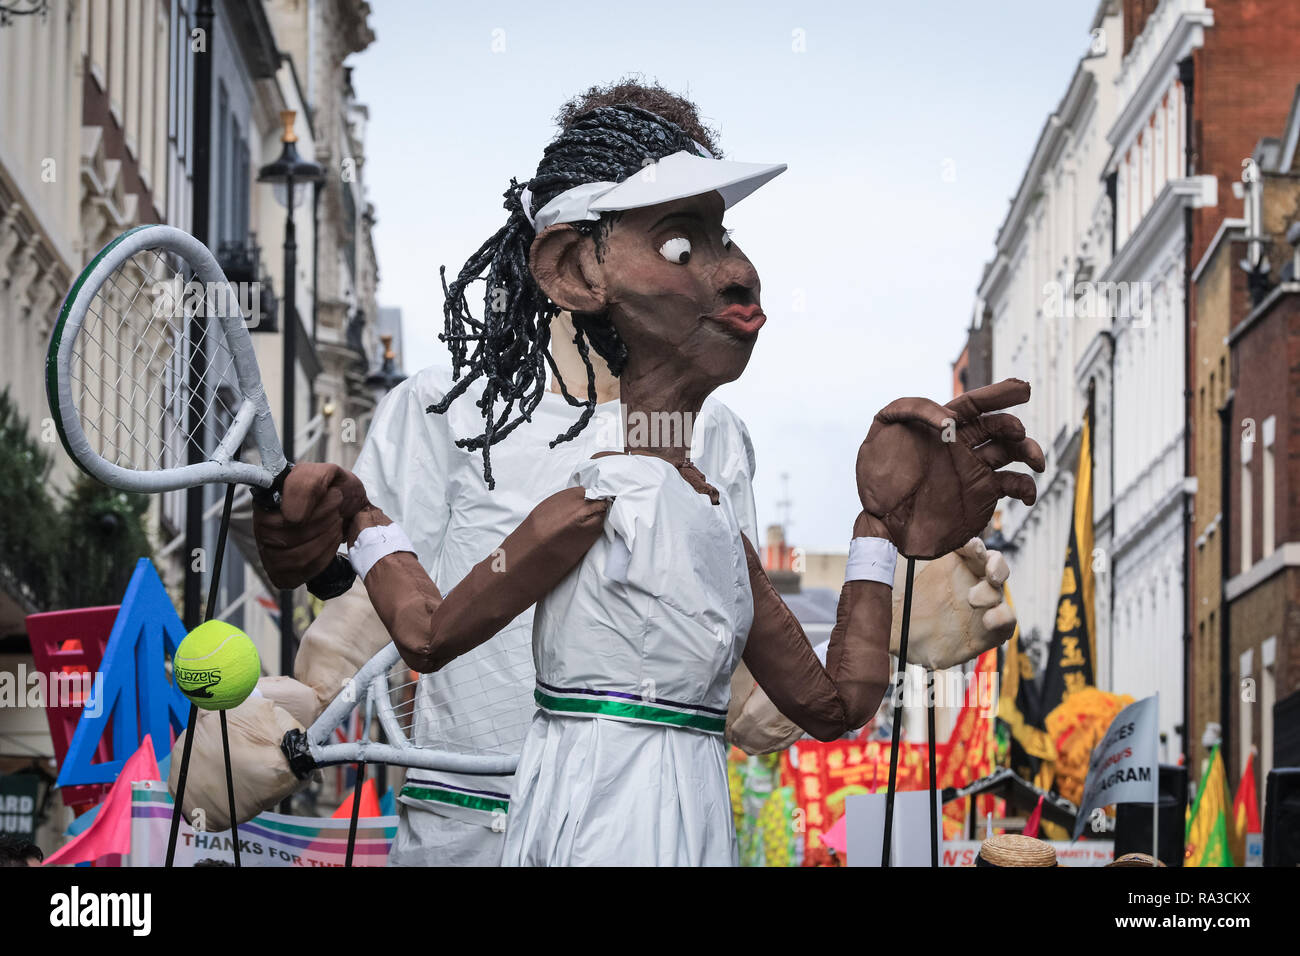 London, UK. 1st Jan 2019. The Borough of Merton's float features giant Wimbledon Tennis players. London's New Year's Day Parade 2019, or LNYDP, features just over 10,000 participants from the USA, UJ and Europe perform in marching bands, cheer leading squads, themed floats from London's Boroughs, and many other groups. The route progresses from Piccadilly via popular landmarks such as Trafalgar Square towards Whitehall in central London every year. Credit: Imageplotter News and Sports/Alamy Live News Stock Photo